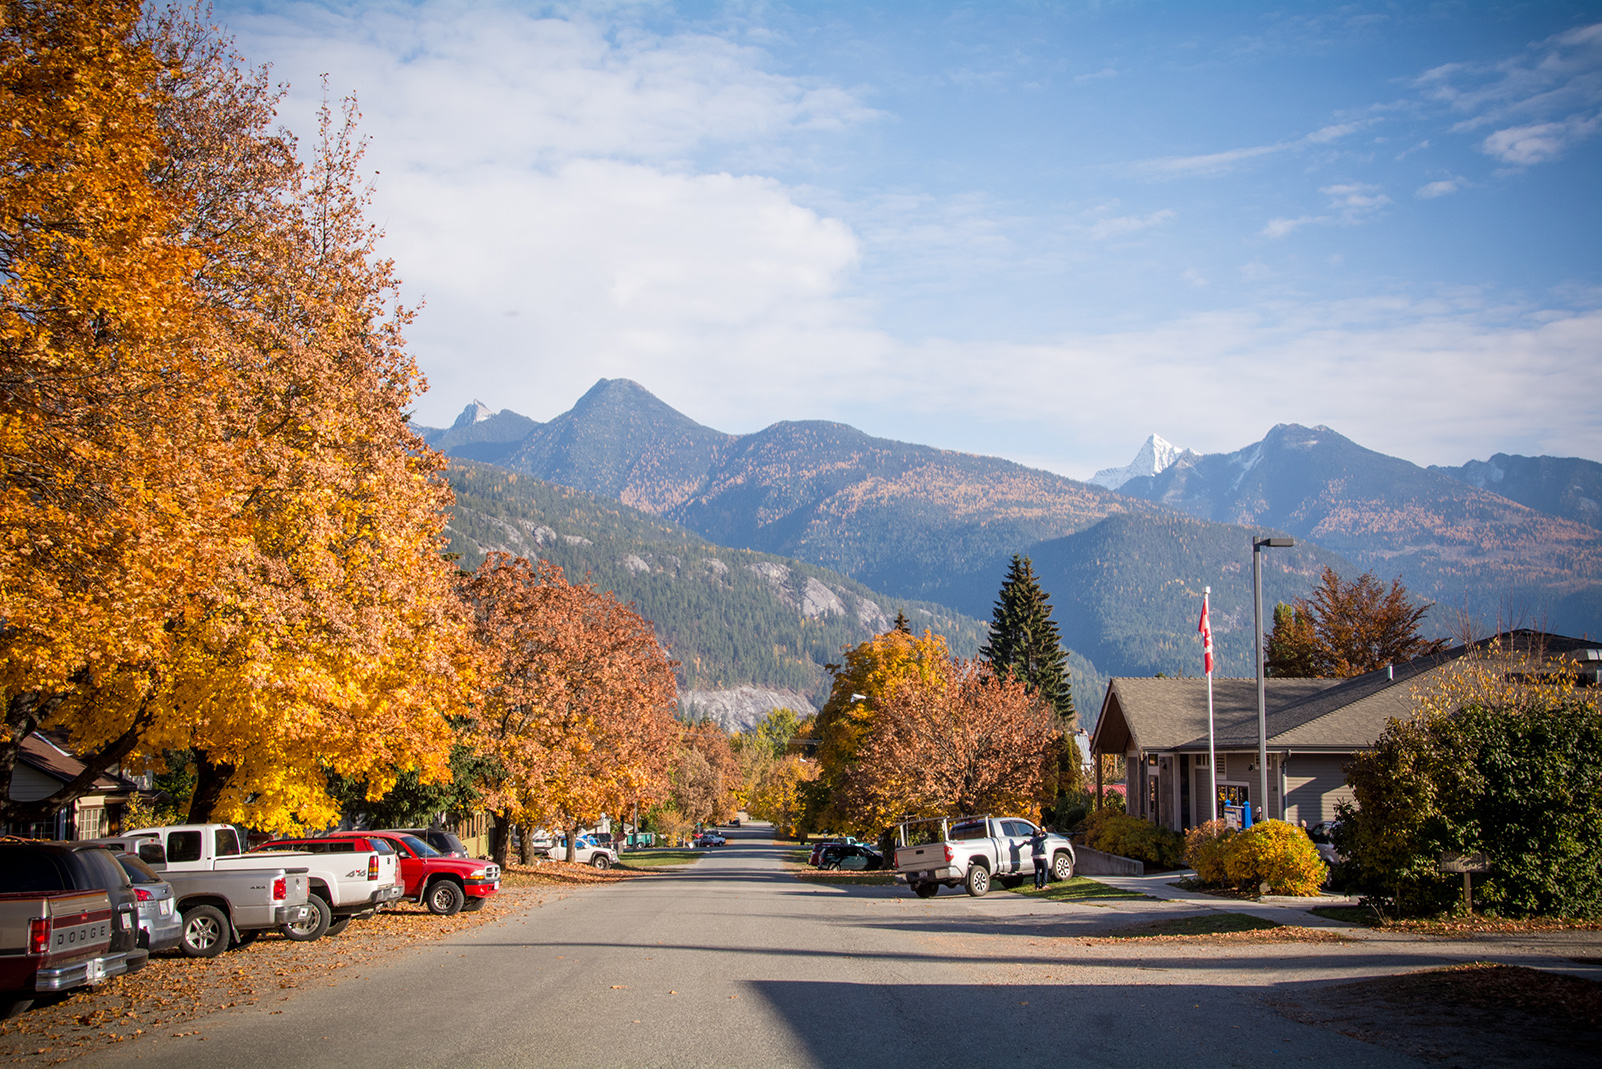 Kaslo BC colourful with vibrant orange trees in the fall.